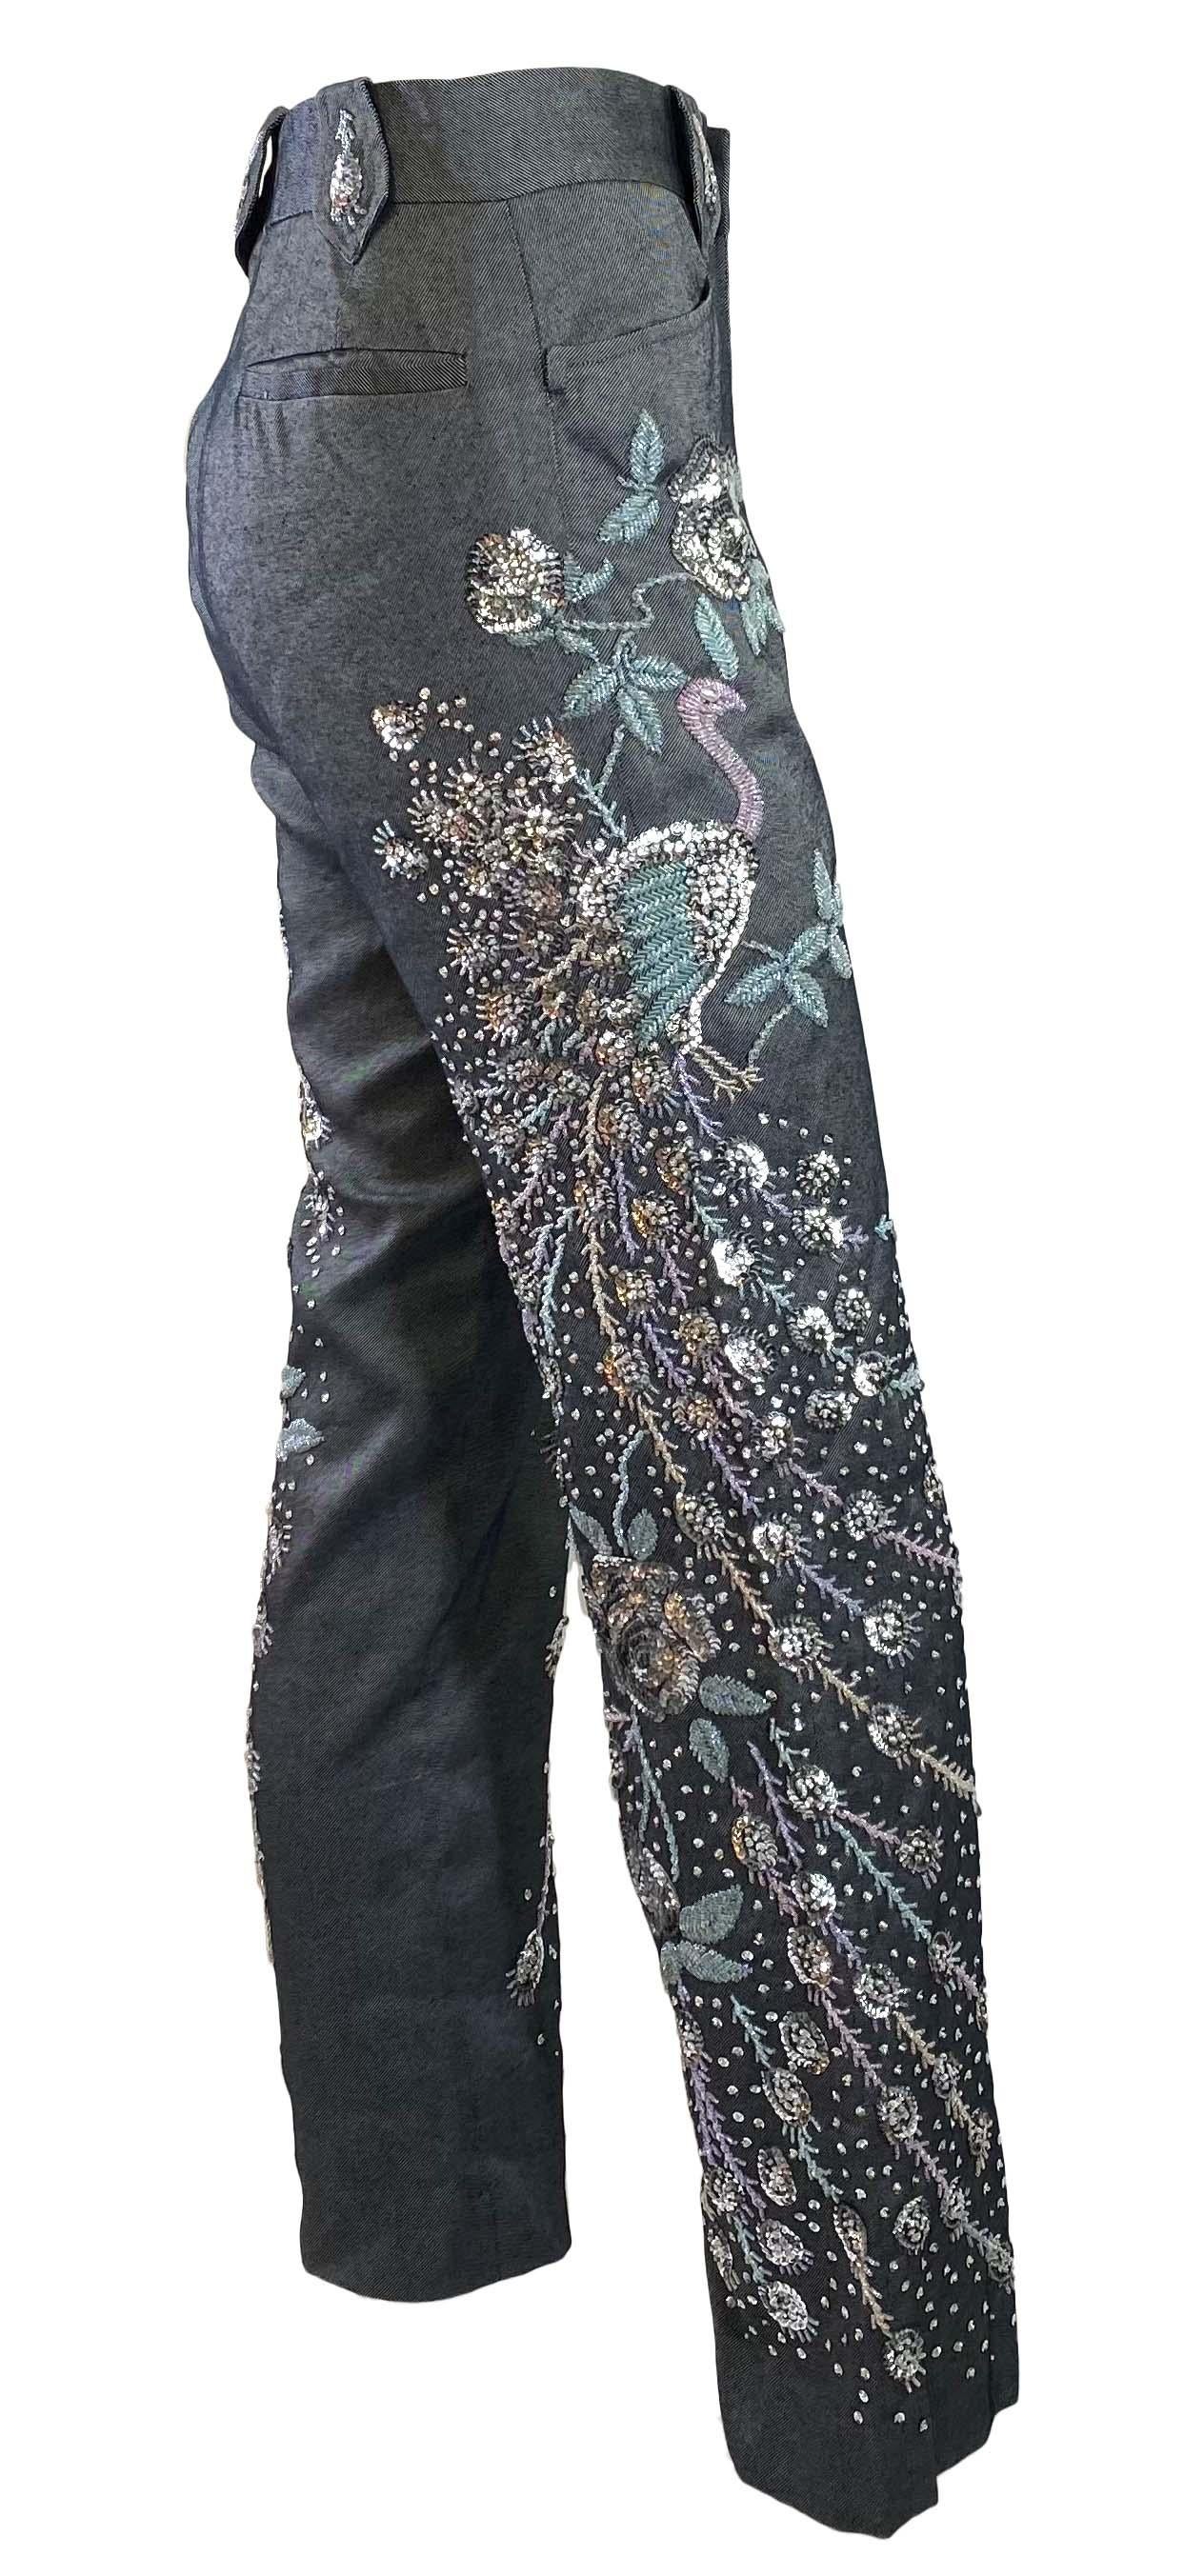 S/S 1999 Gucci by Tom Ford Runway Finale Peacock Beaded Silk Pants Documented For Sale 1